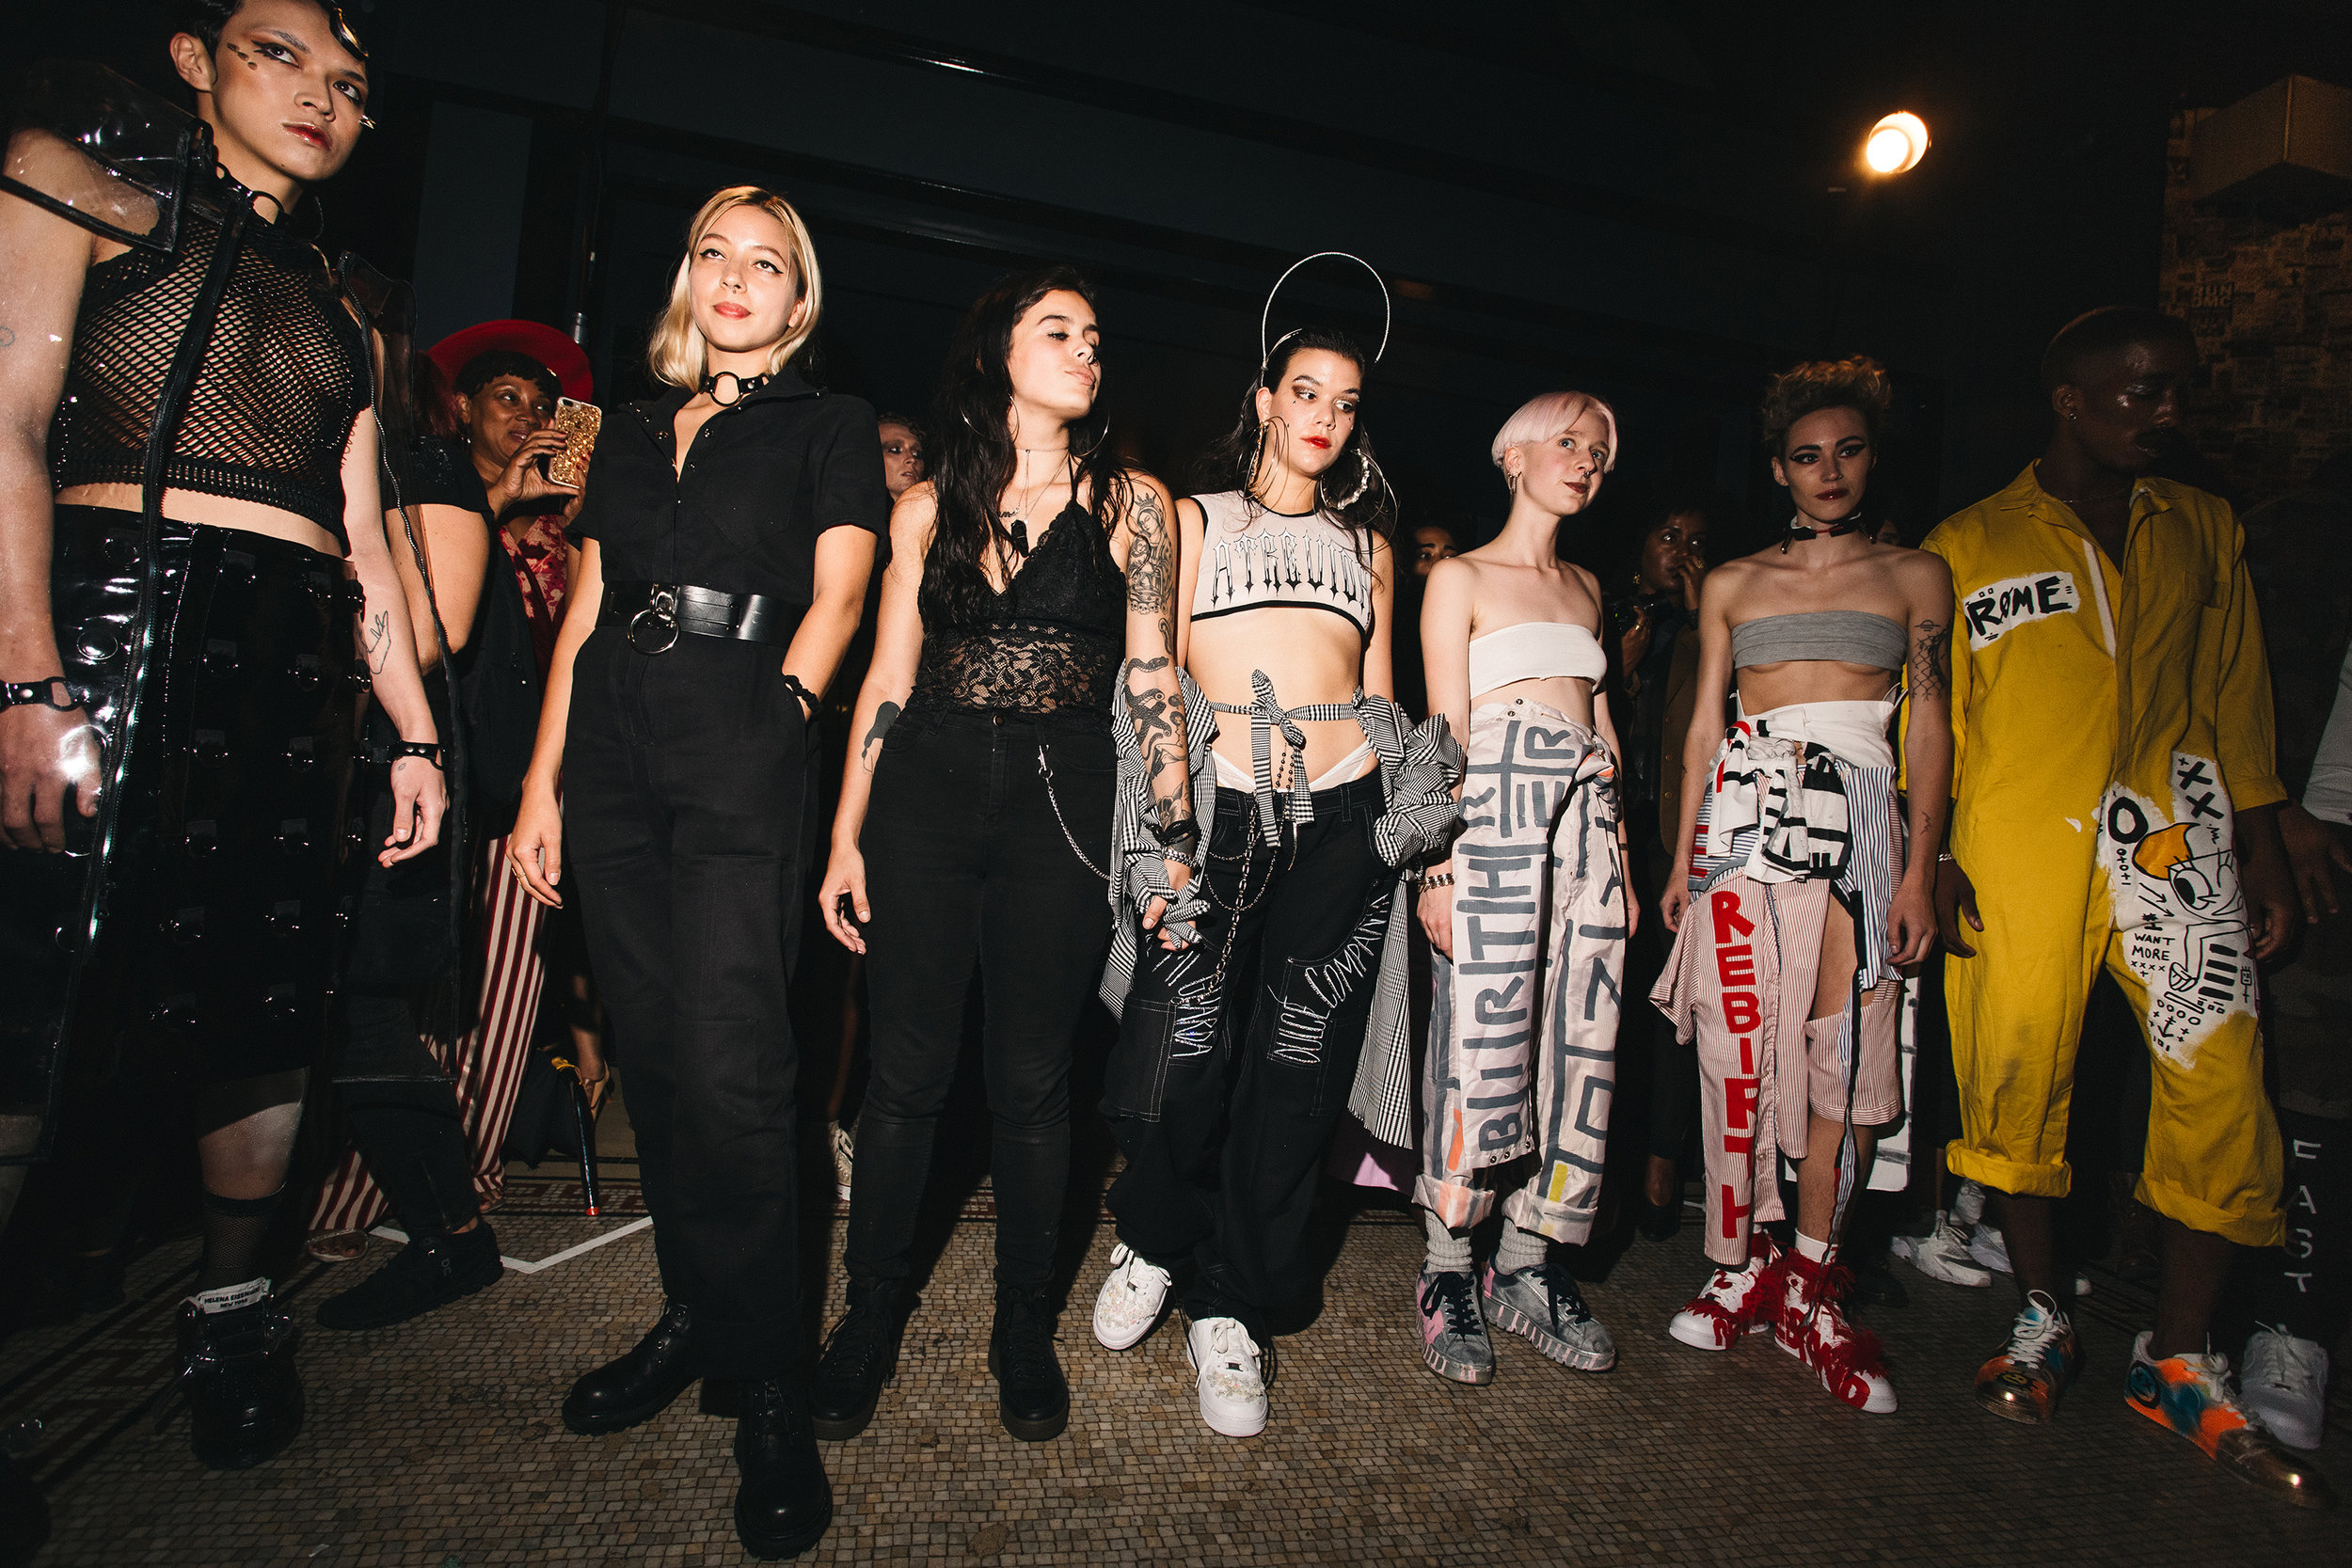 MI and Kristen (2nd and 3rd from right) after OR debut at DRØME's NYFW September 2017 fashion show at the Ace Hotel